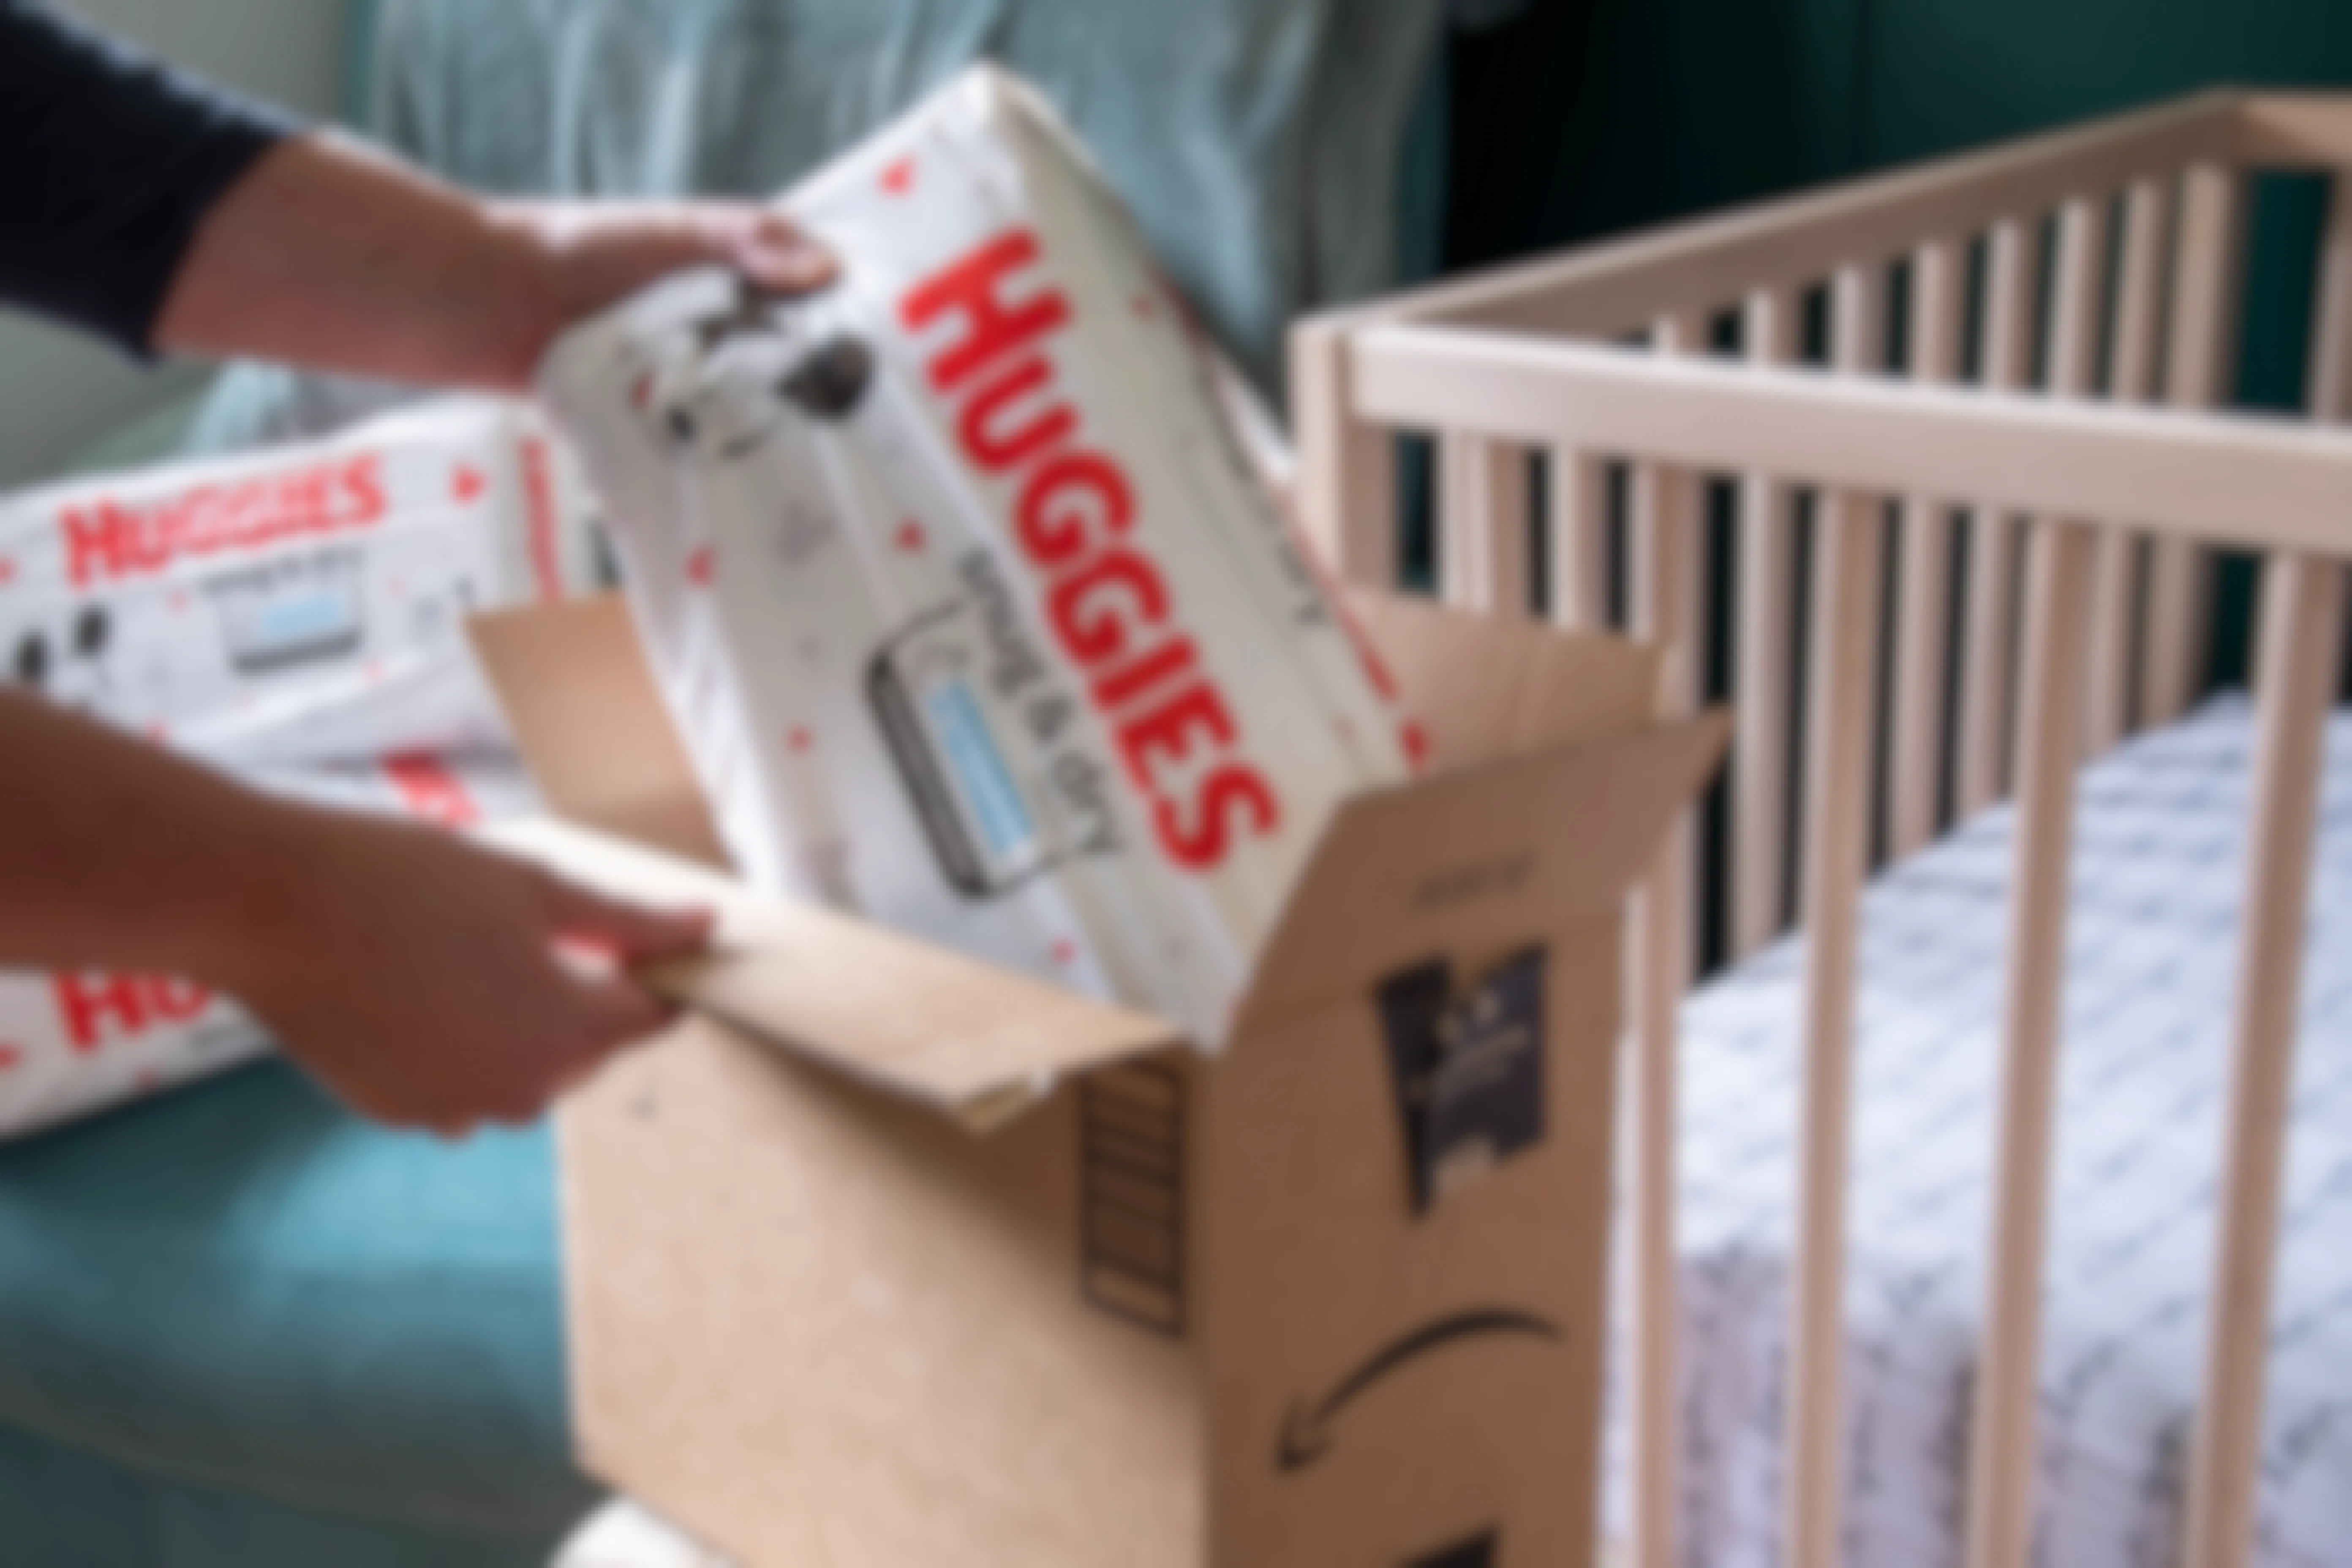 A pack of Huggies diapers being pulled from an Amazon box.